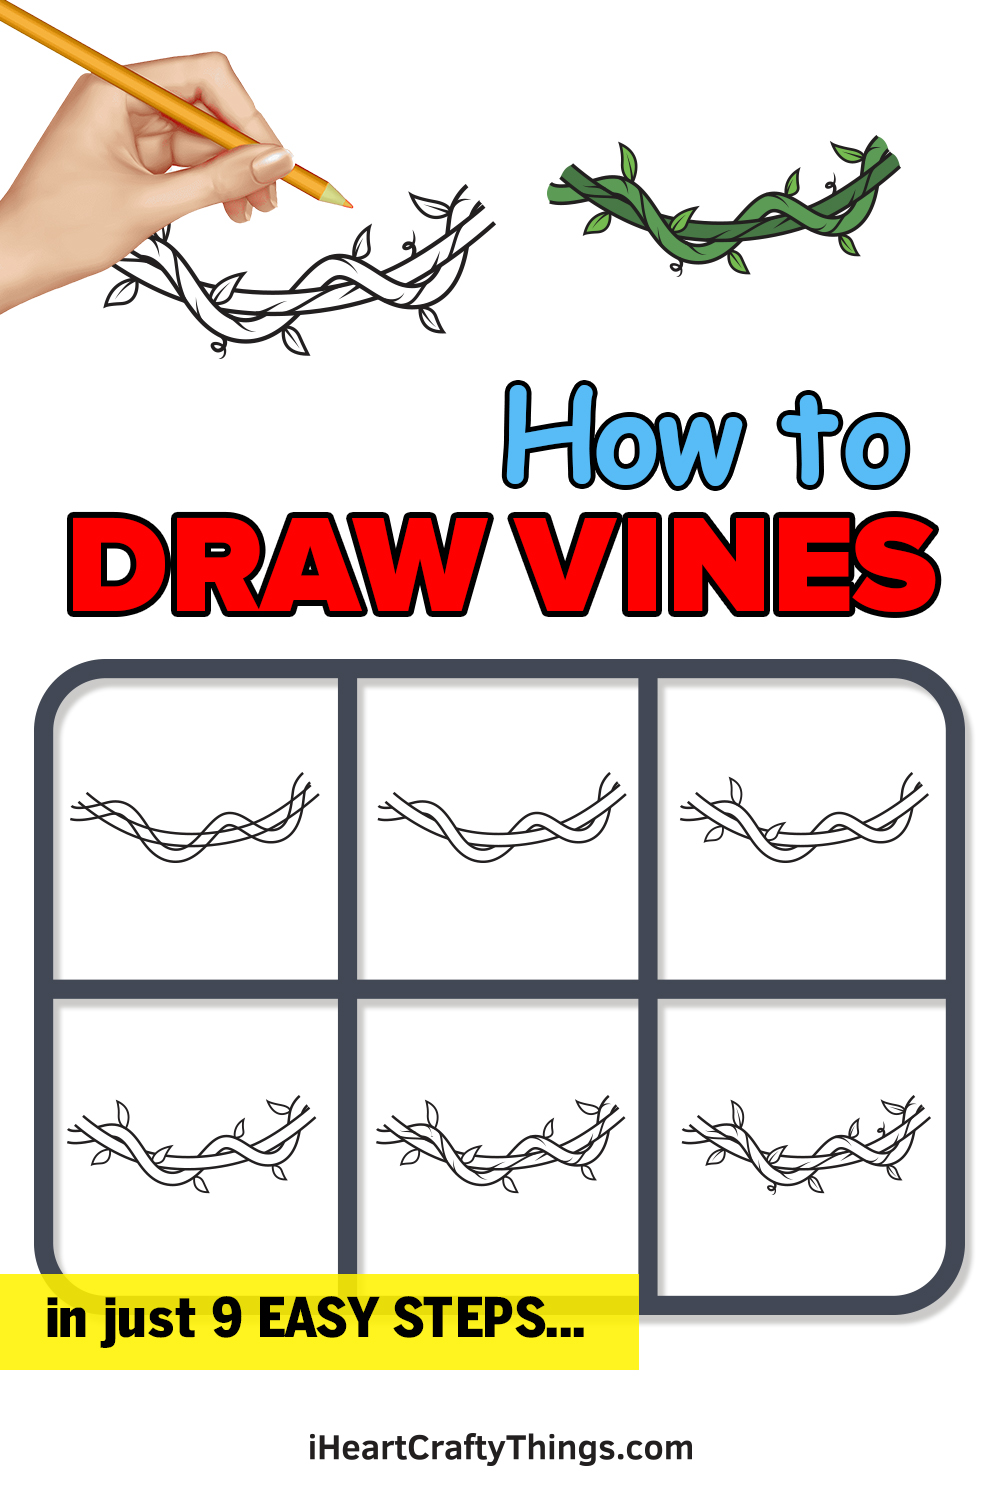 how to draw vines in 9 easy steps